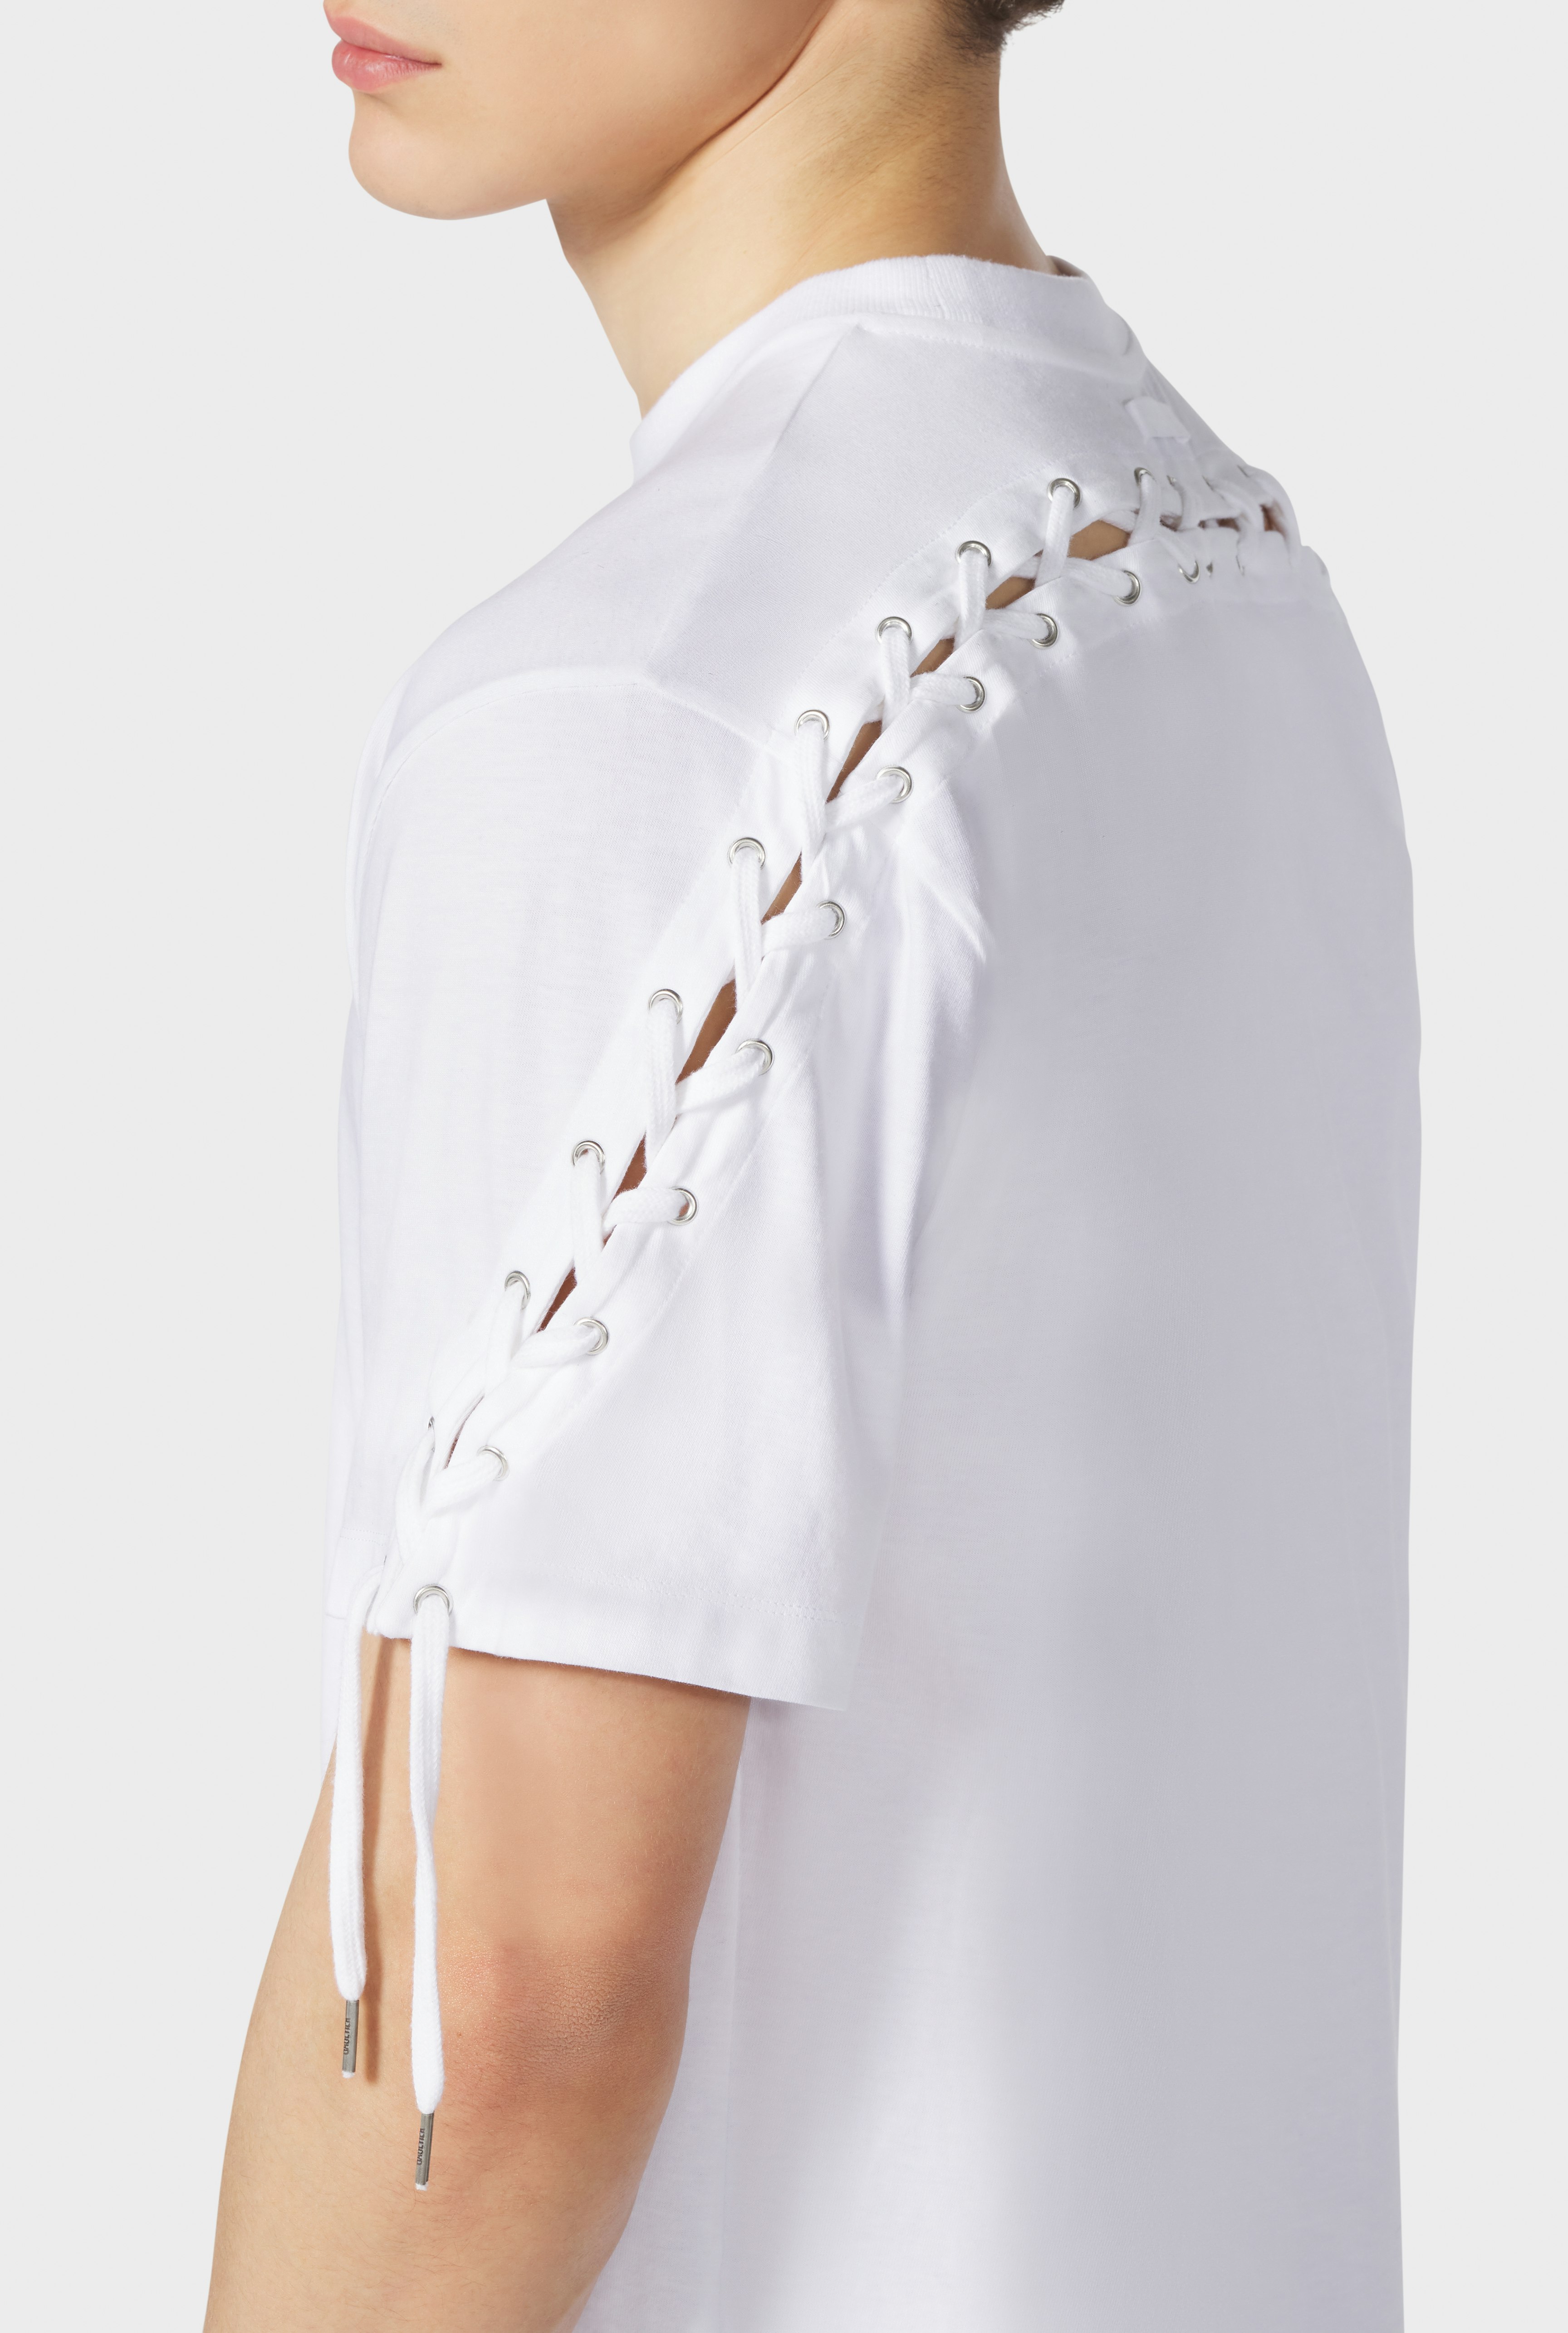 The White Lace-Up JPG T-Shirt